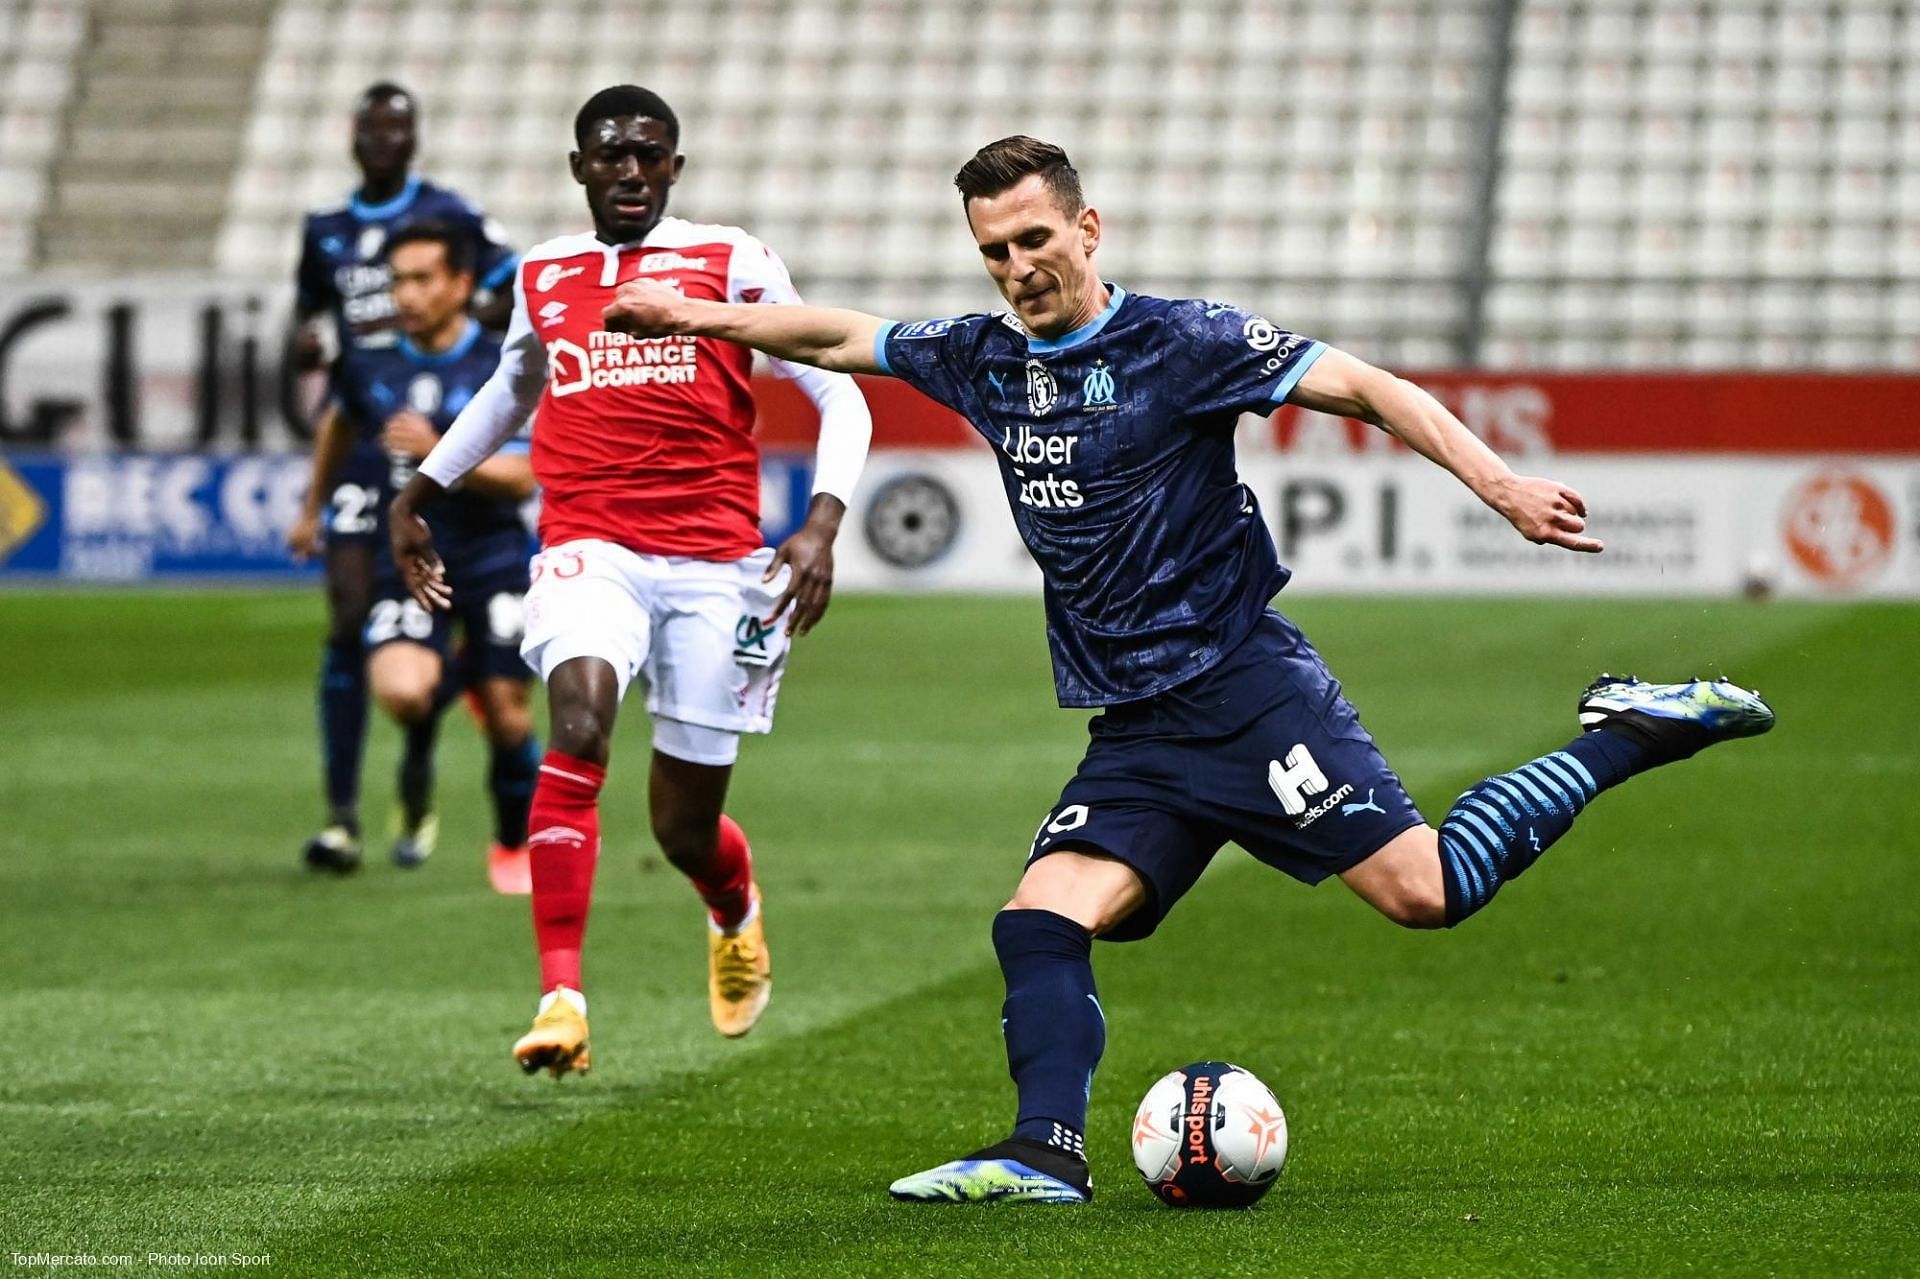 Reims take on Marseille in the Ligue 1 on Sunday